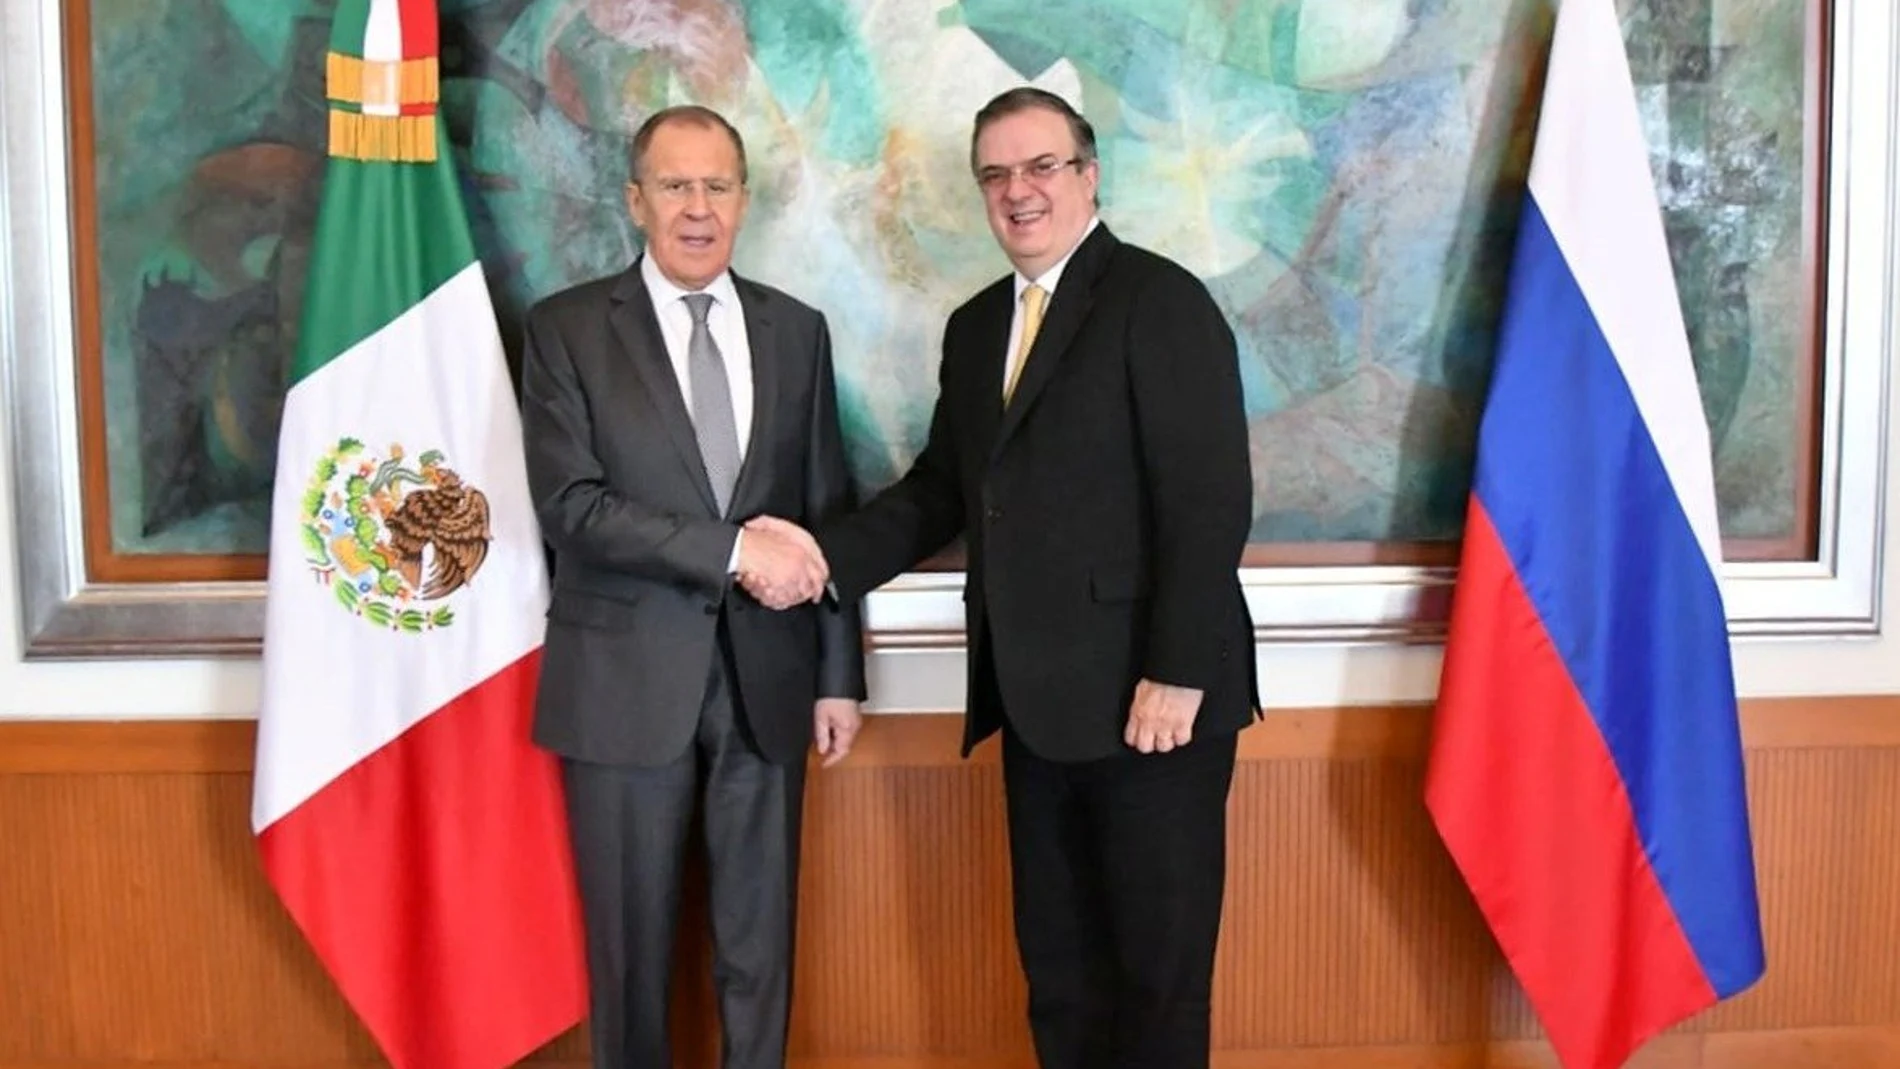 Russian Foreign Minister Sergei Lavrov shakes hands with Mexico's Foreign Minister Marcelo Ebrard after a private meeting at the Foreign Ministry Building (SRE) in Mexico City